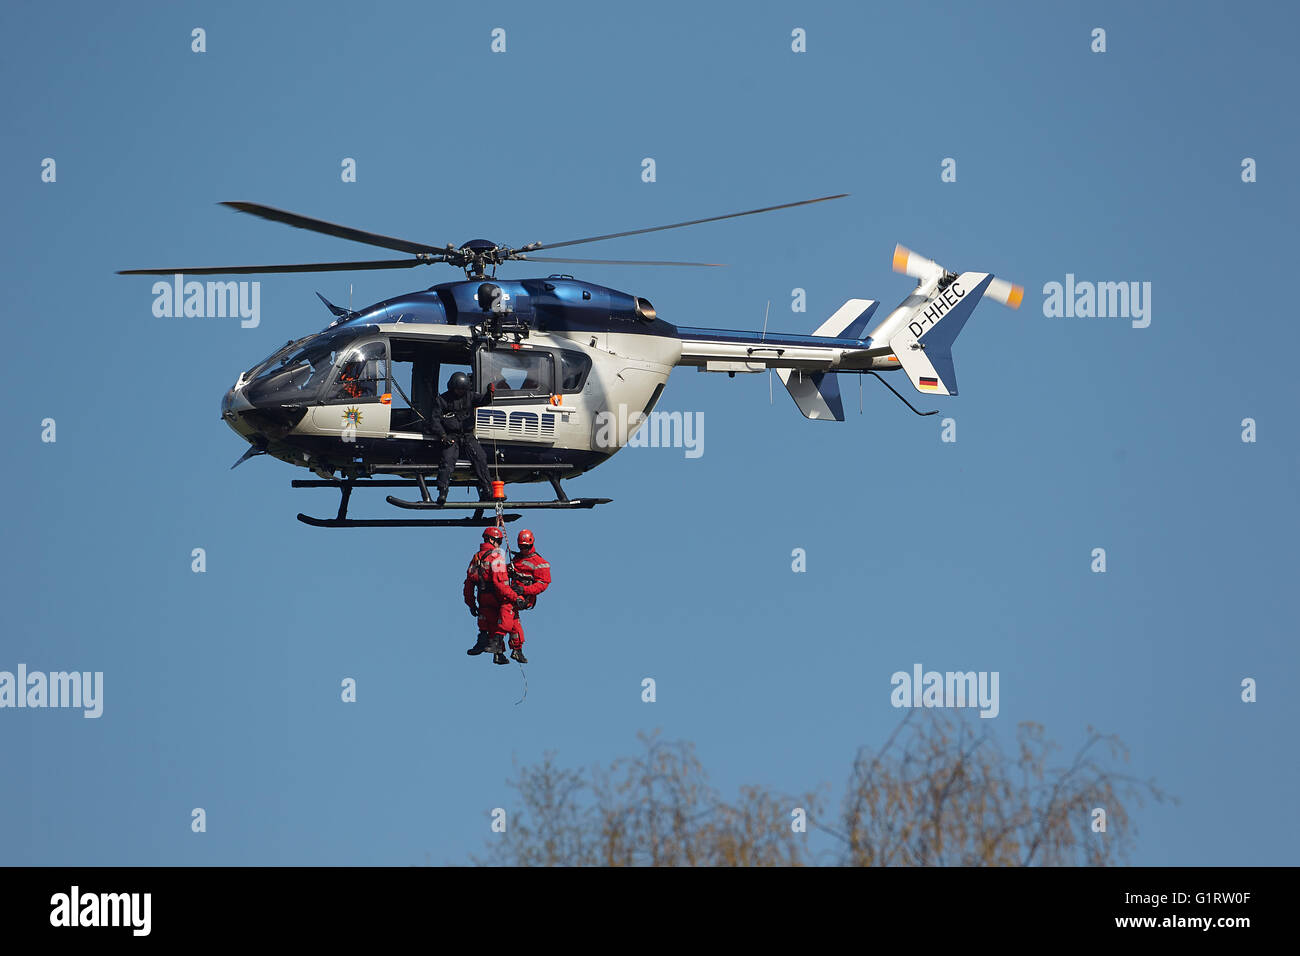 Height savior of the fire brigade Wiesbaden practice with the police helicopter squadron Hesse, helicopter Airbus EC 145 Stock Photo